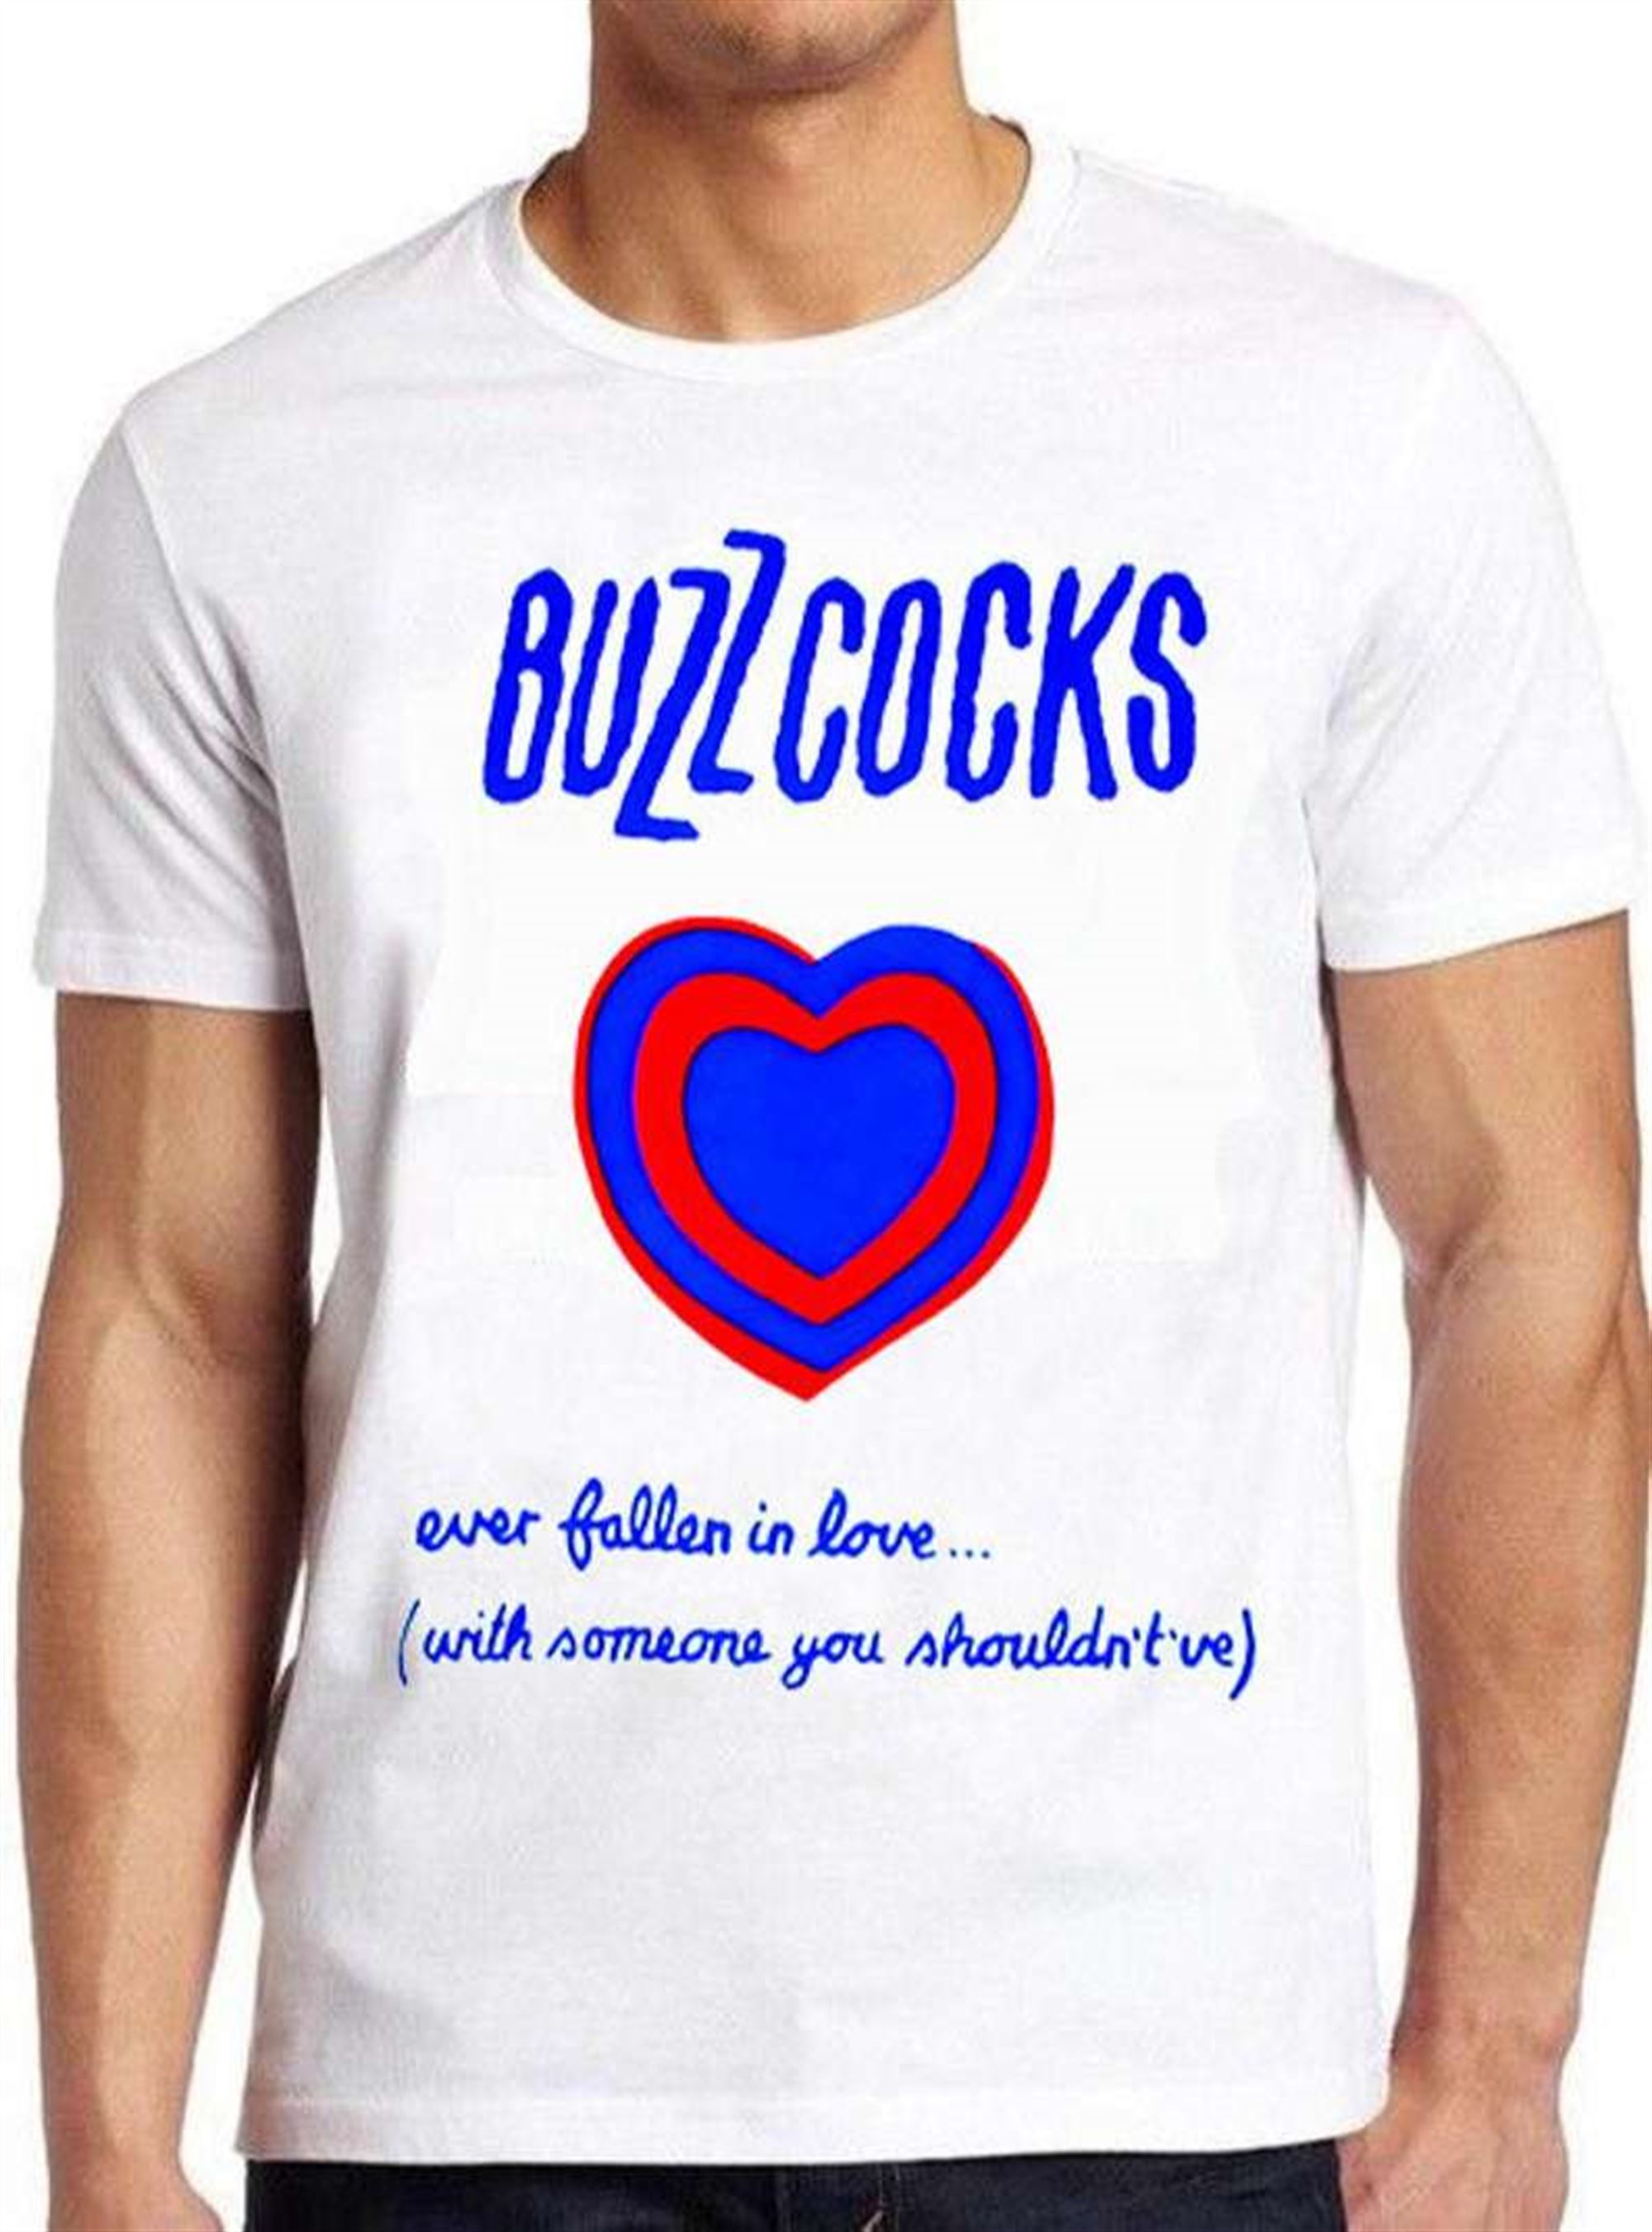 Buzzcocks T Shirt Ever Fallen In Love Plus Size Up To 5xl